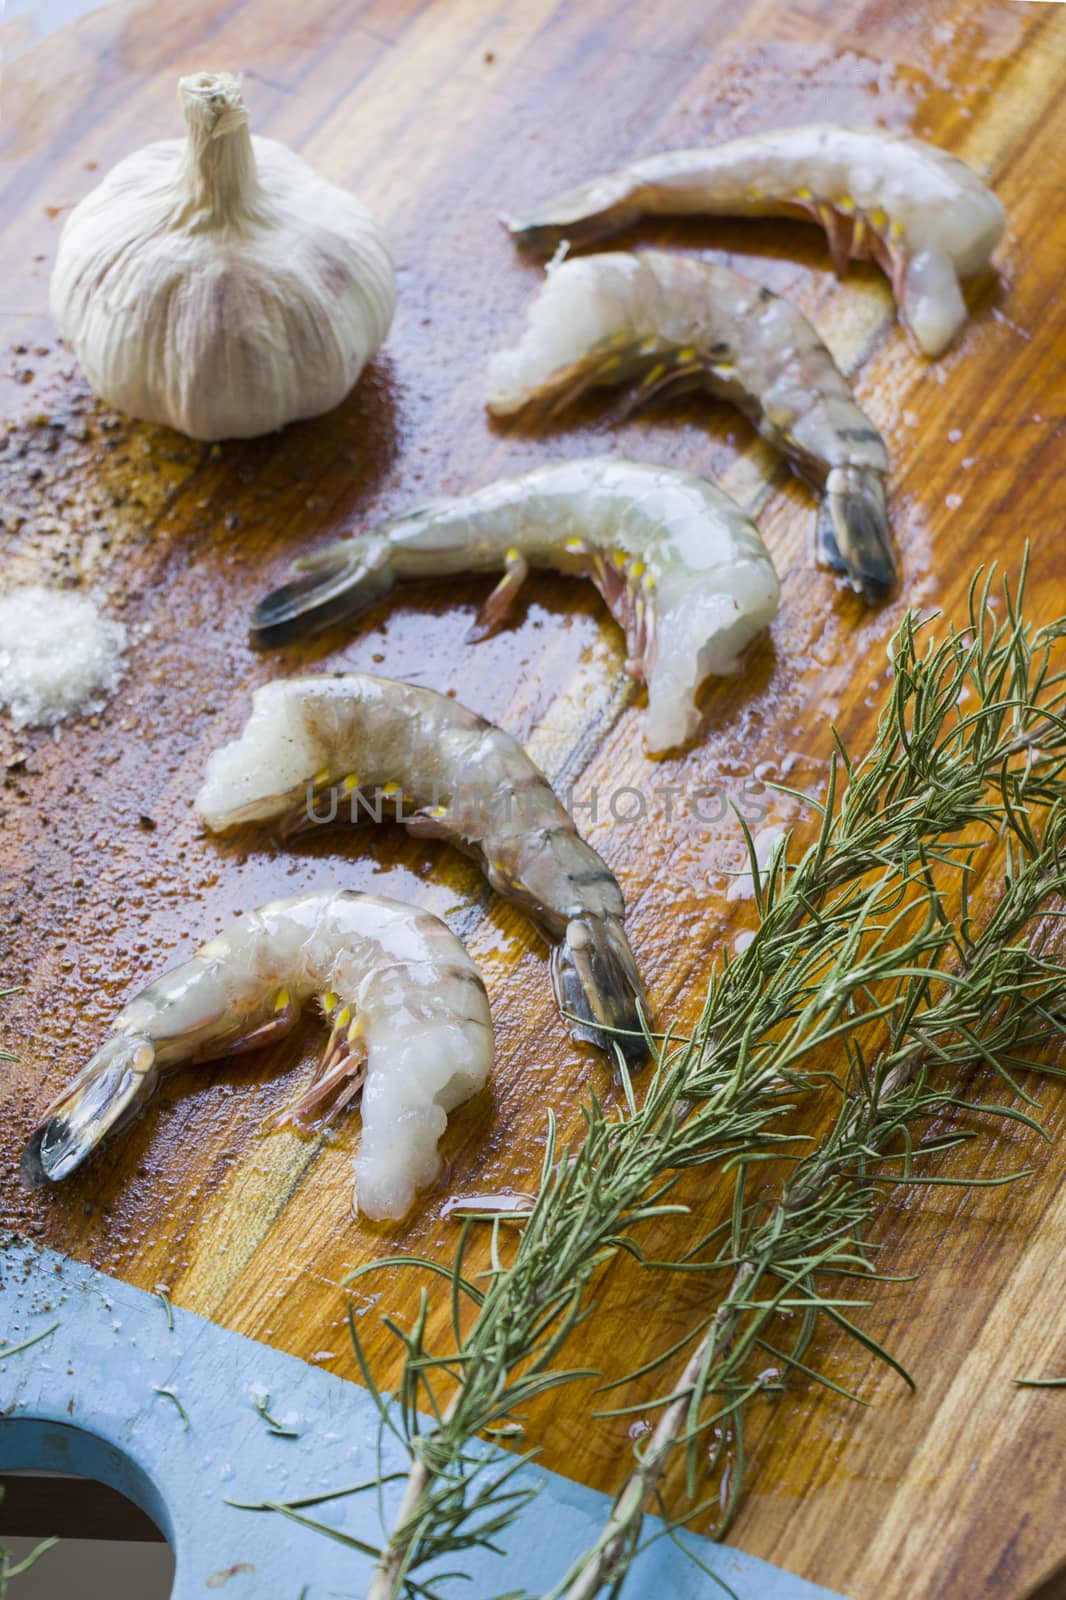 Raw shrimps on the wooden board with salt, dry pepper and rosemary, natural light.